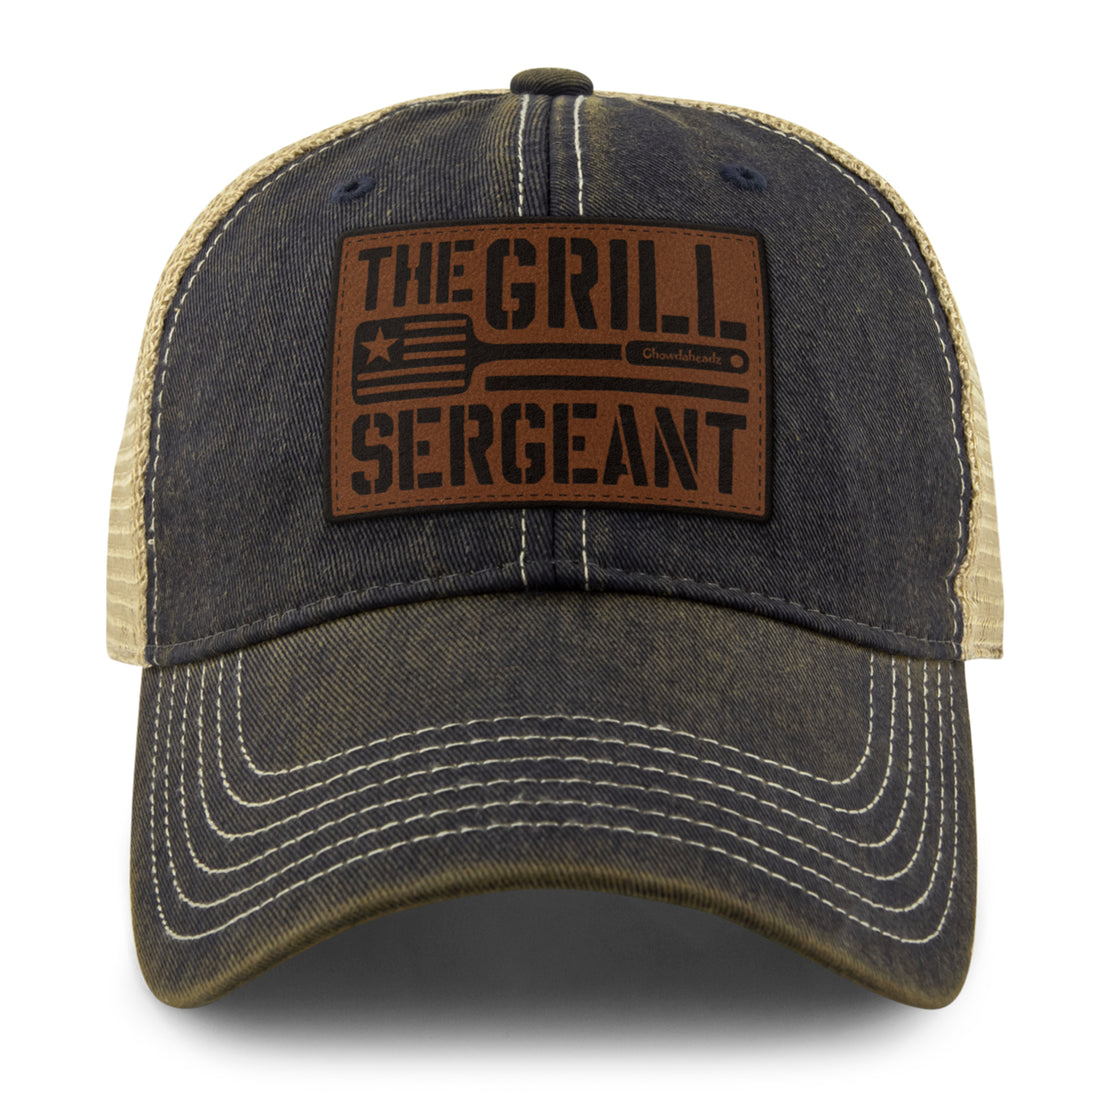 The Grill Sergeant Leather Patch Dirty Water Trucker - Chowdaheadz